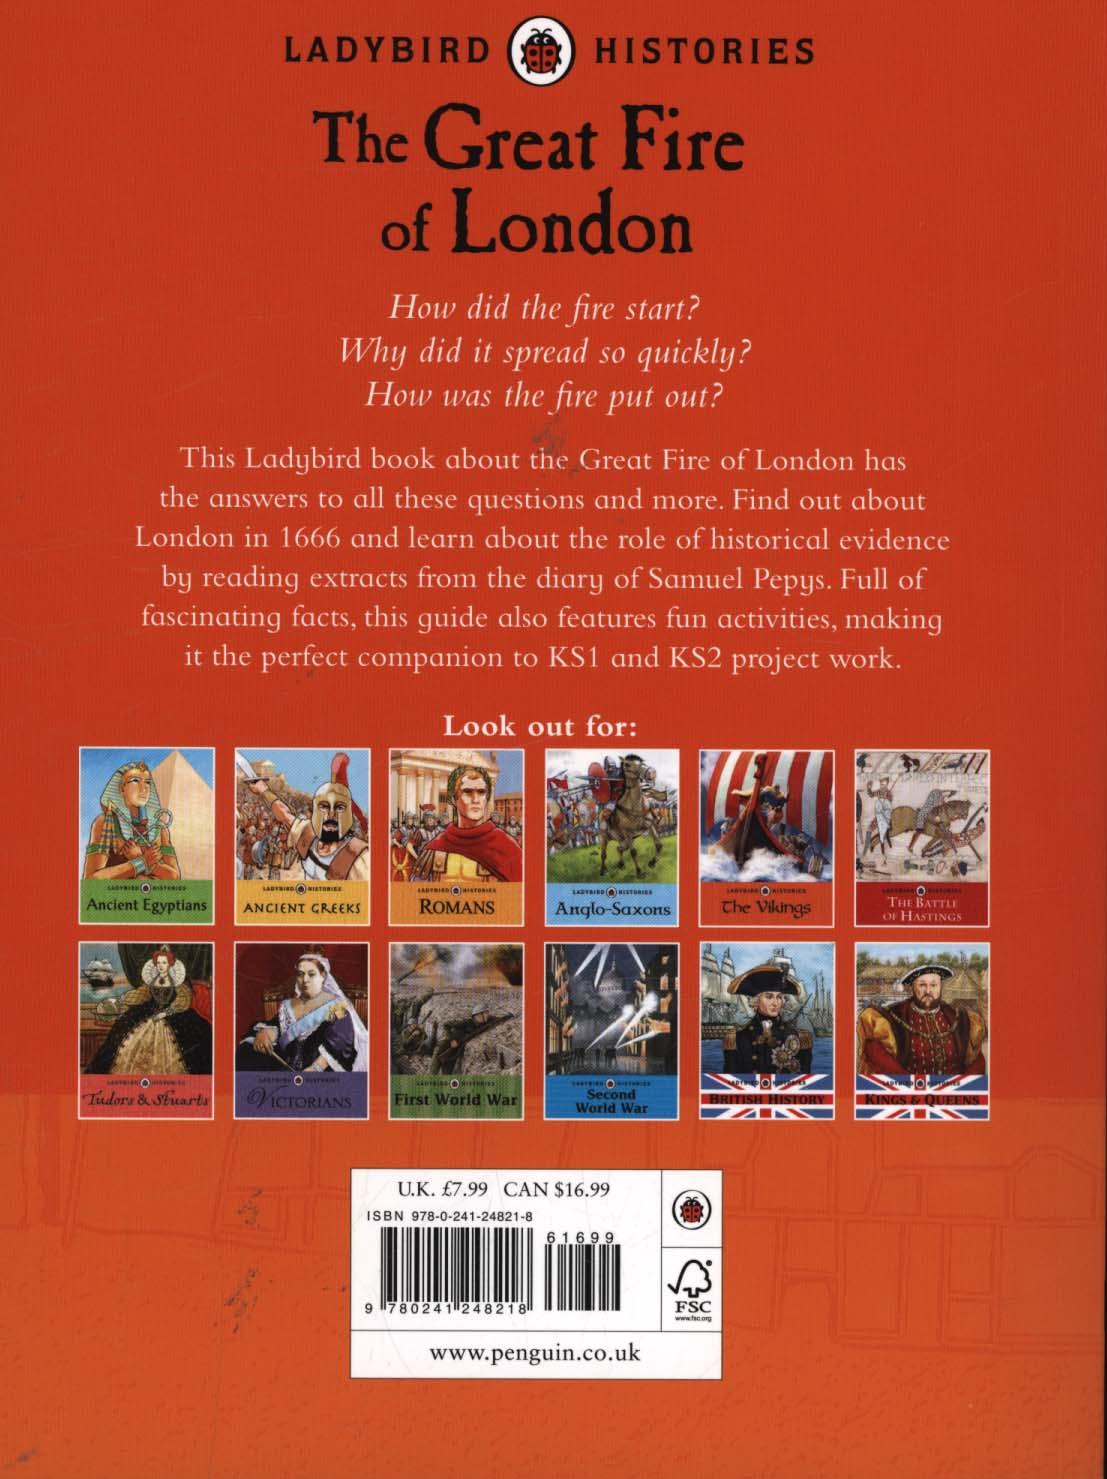 Ladybird Histories: The Great Fire of London